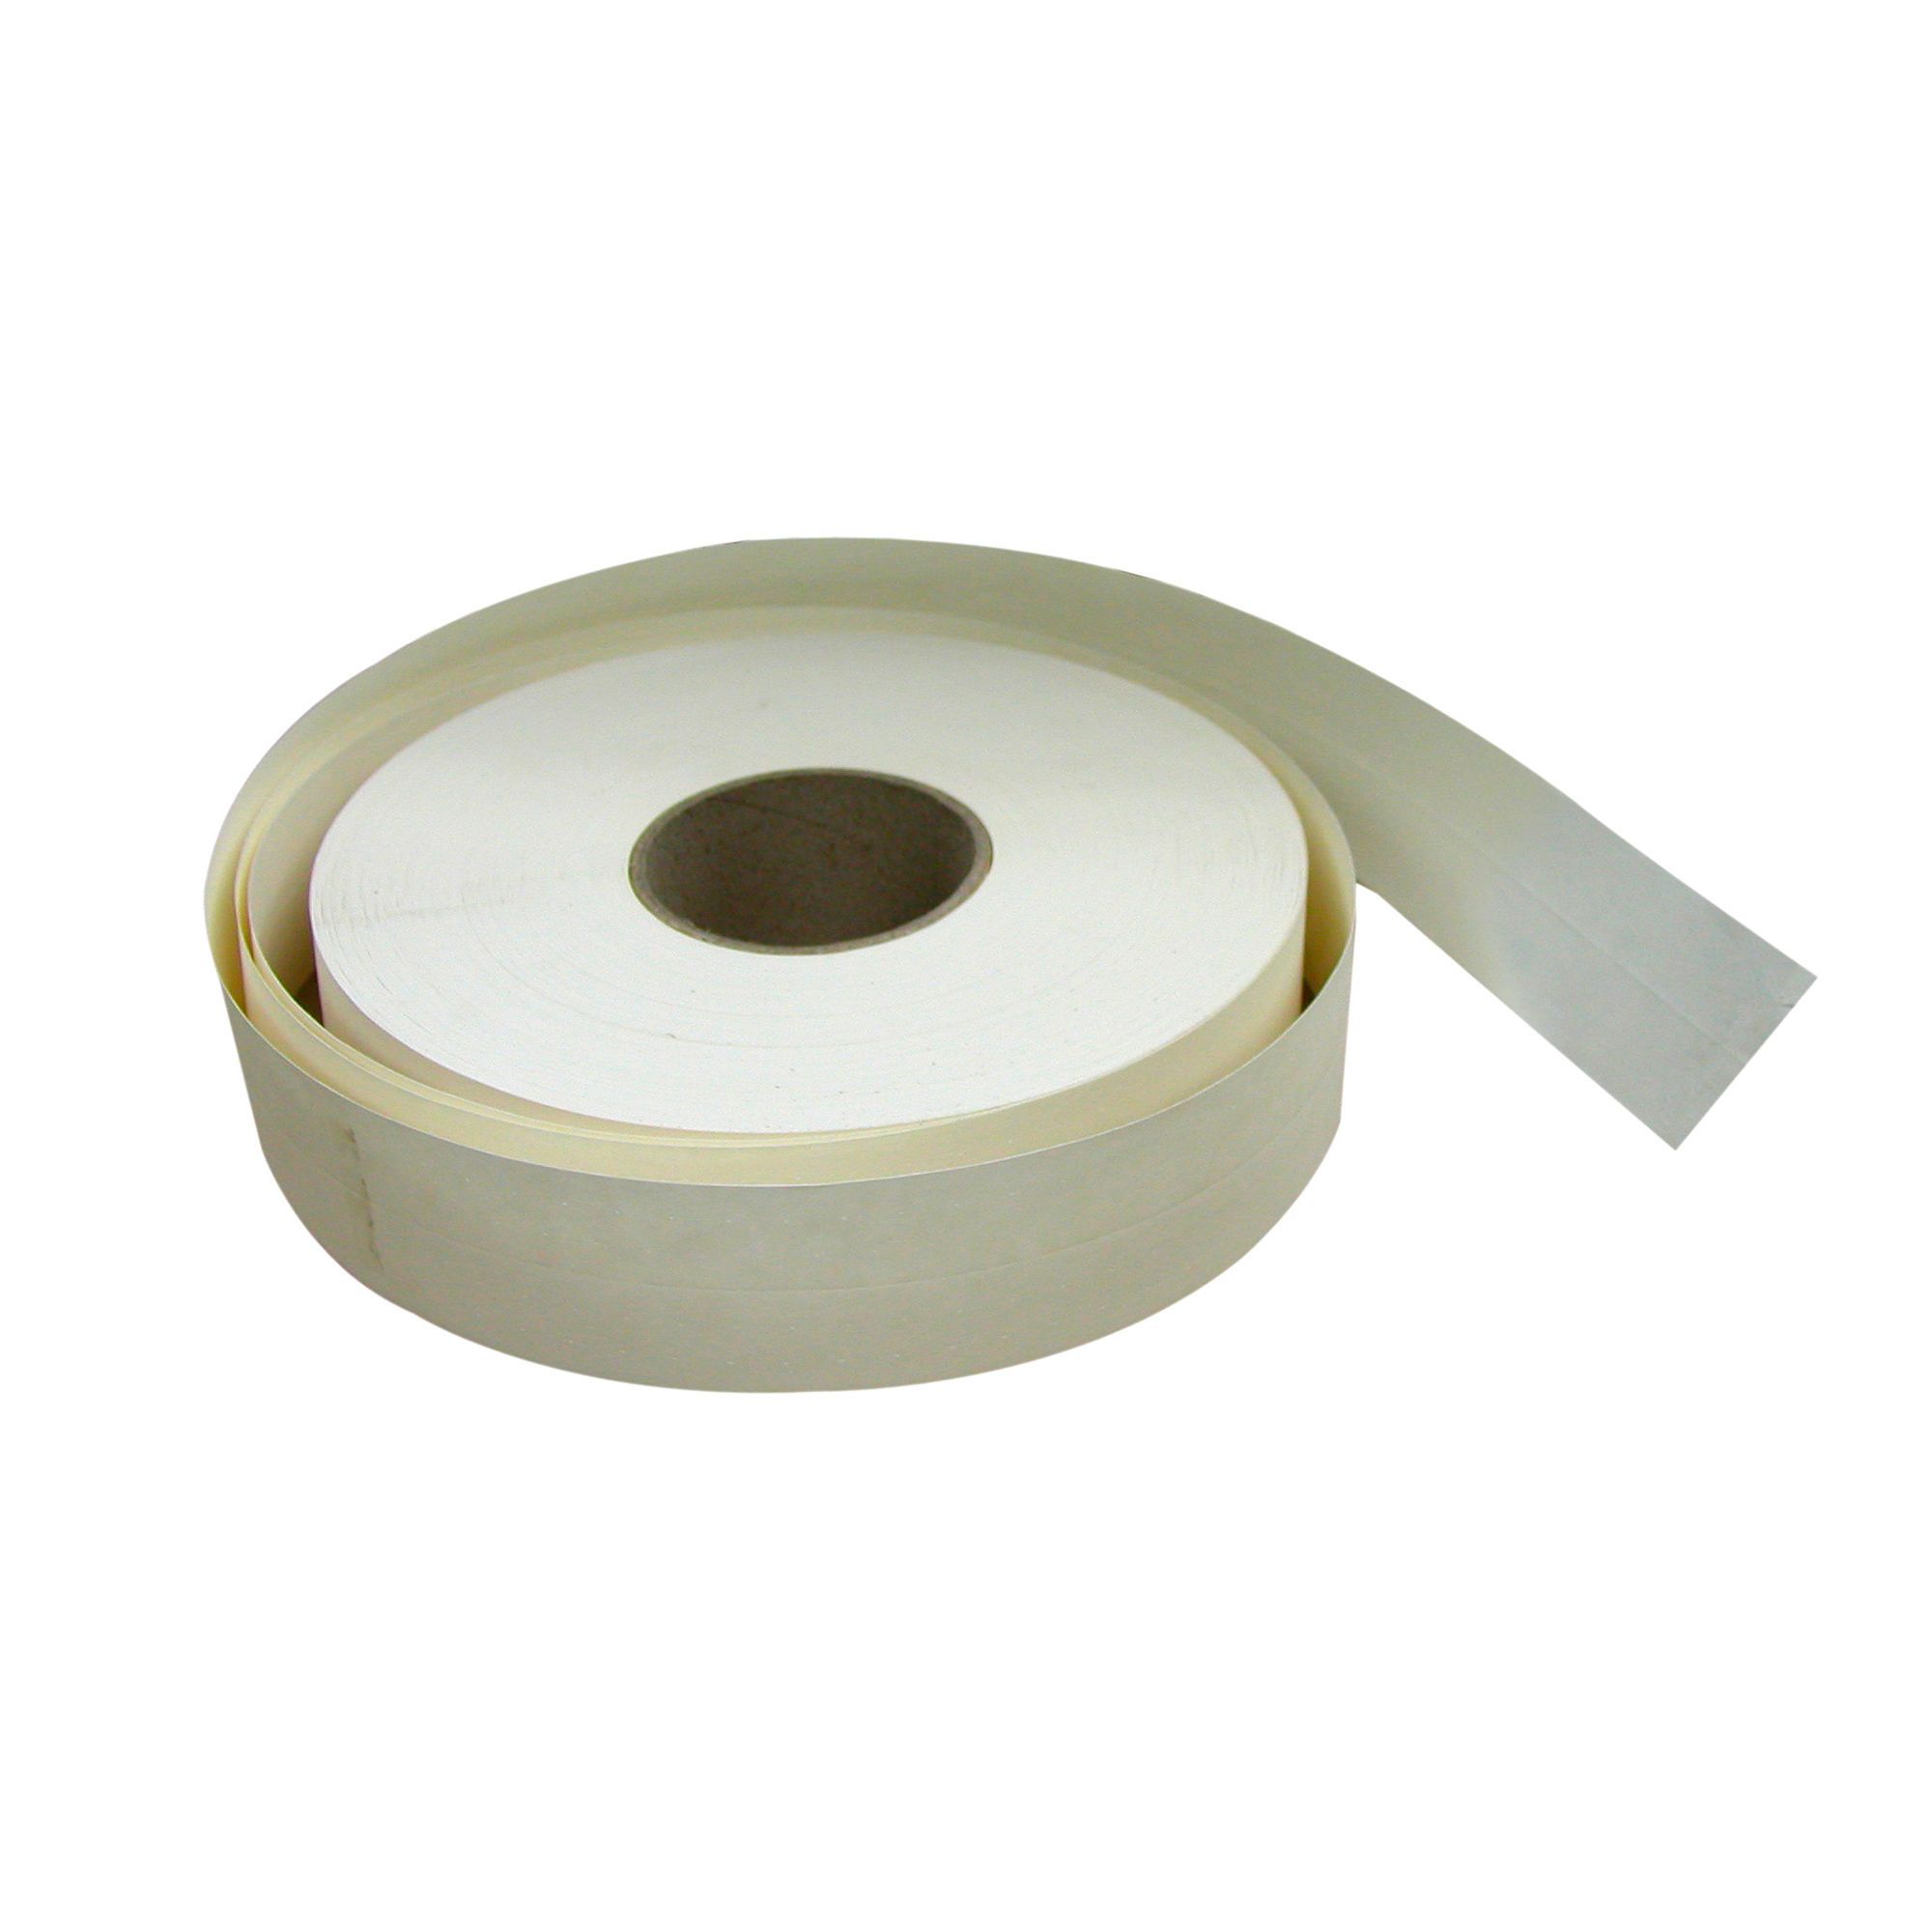 Drywall Paper Tape - 2 x 500